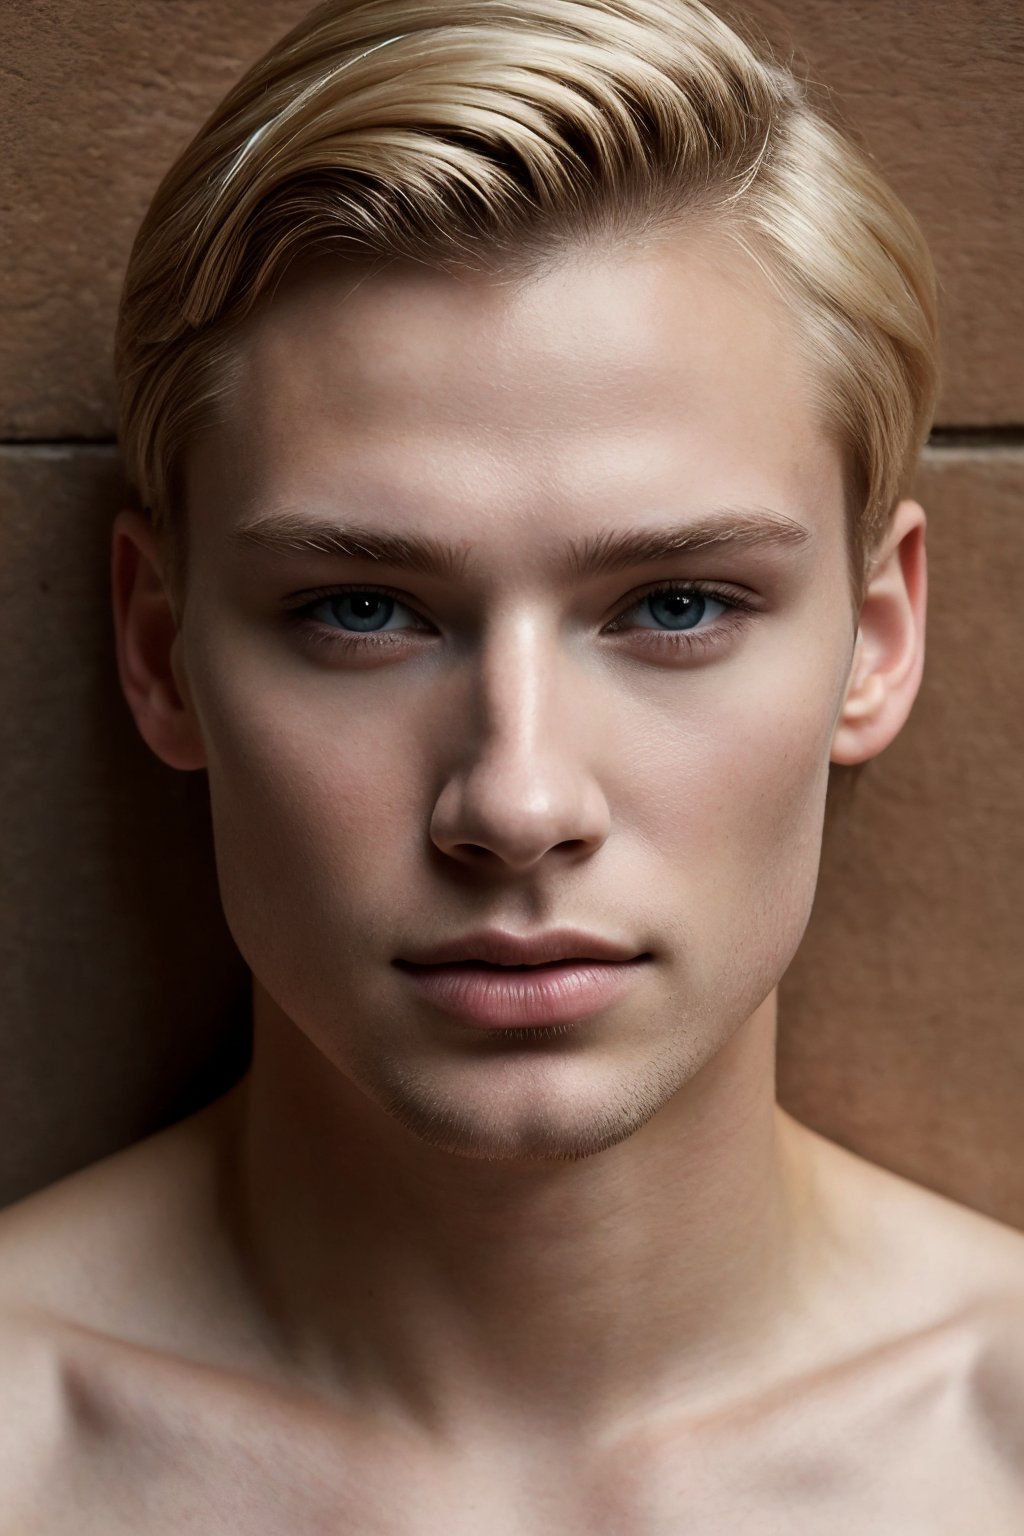 Ultra-high definition (8k) 1guy portrait of a 20-year-old blond Swedish gentleman with chiseled features and piercing blue eyes. The subject, sporting a shaved look, leans against a wall in a relaxed pose, gazing directly at the viewer with a subtle, enigmatic smile. Close-up shot captures every detail: natural, textured skin with visible pores, defined facial features, and fabric rendering that showcases intricate folds. Film grain and ray tracing enhance the image's realism. Anatomically correct rendering of the subject's physique. (MkmCut)